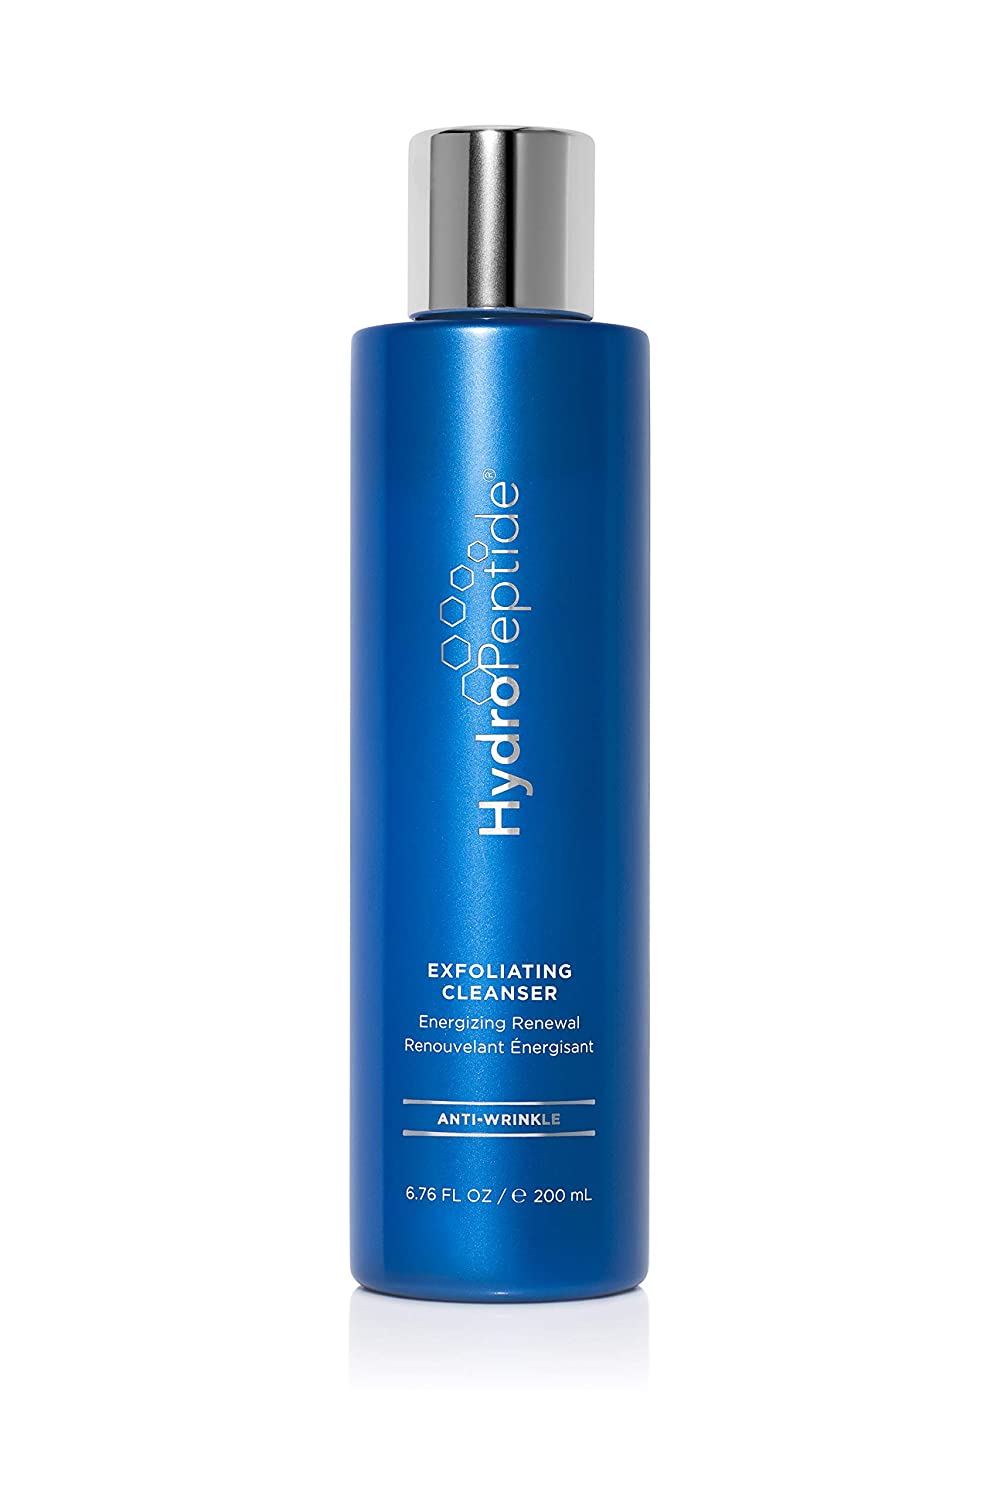 HydroPeptide Exfoliating Cleanser Energizing Renewal - European Beauty by B